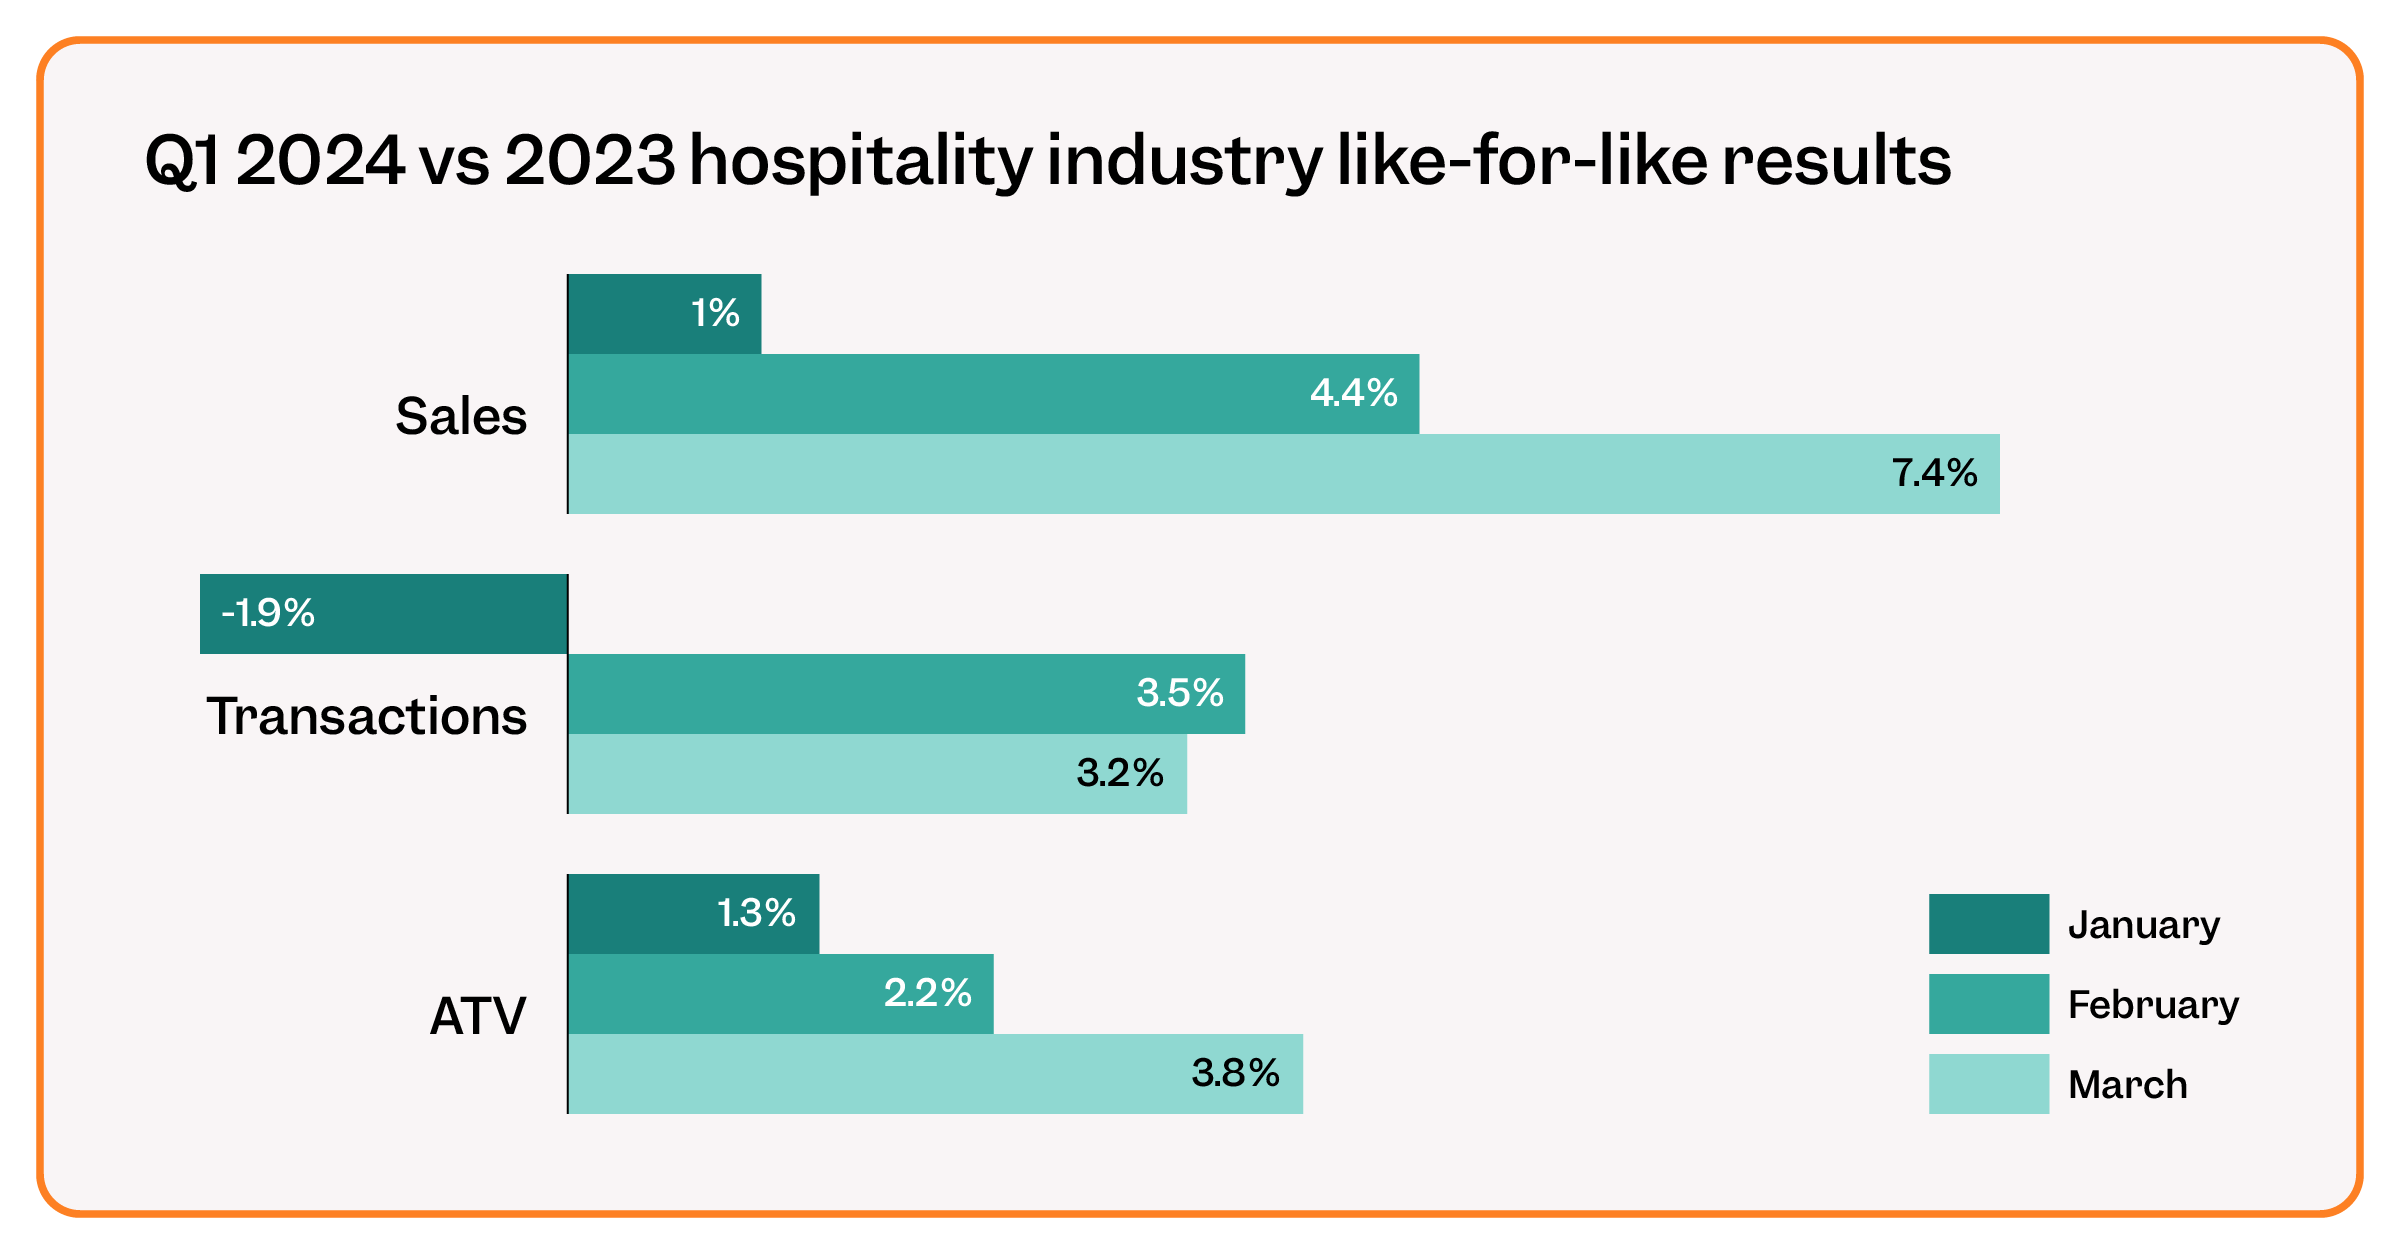 Q1 hospitality industry results